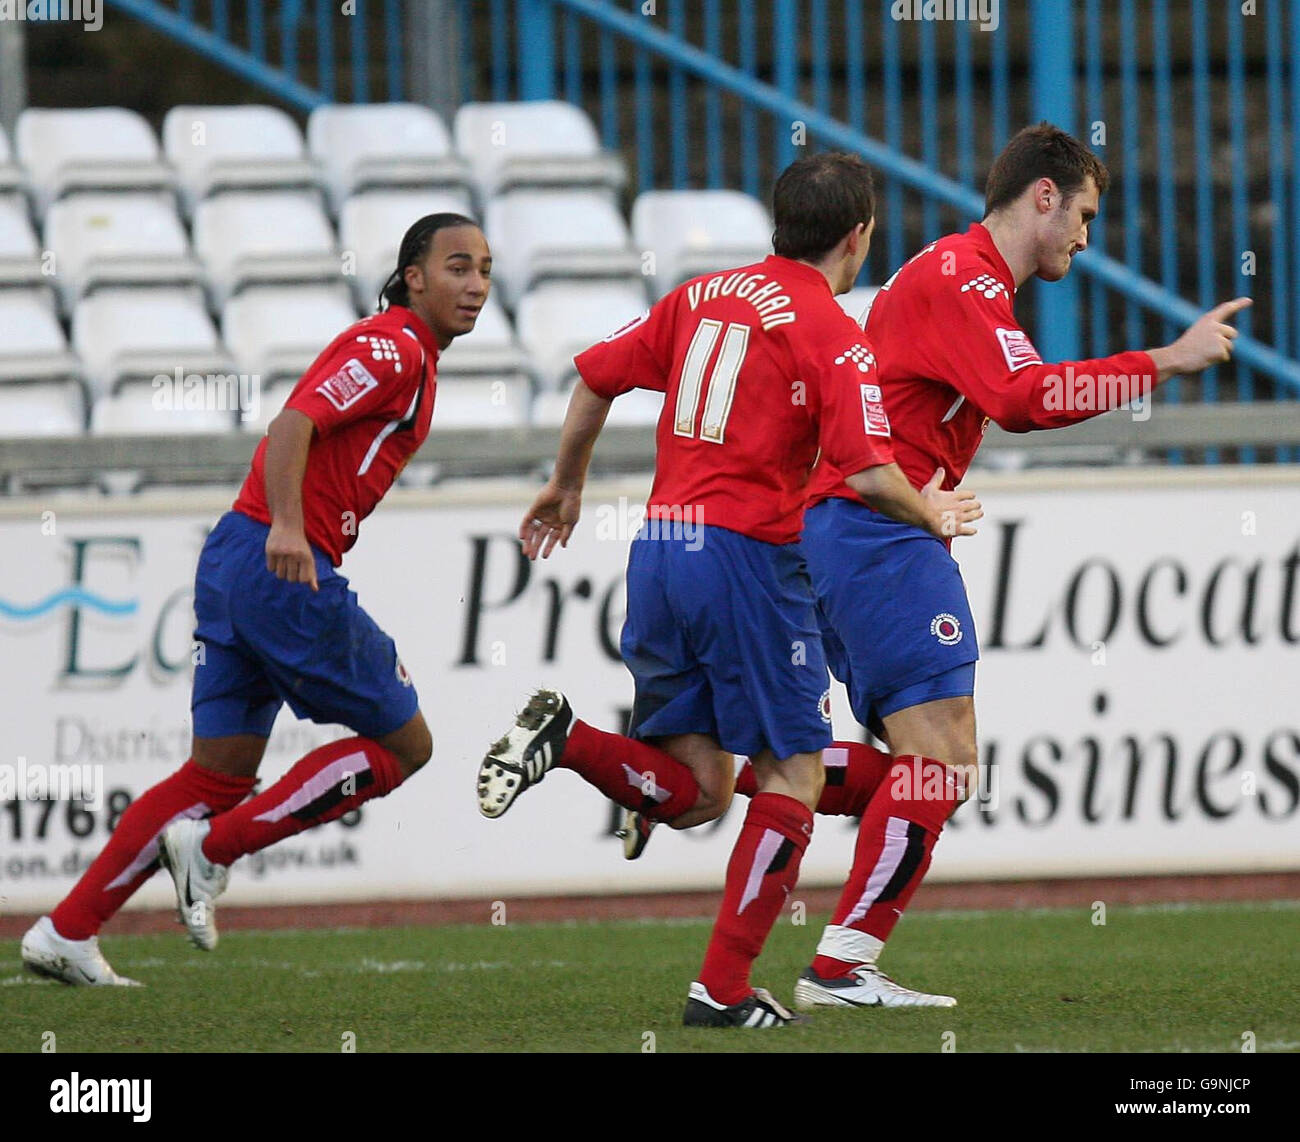 Crewe Alexandra's Julien Baudet (right) celebrates with team-mates after scoring against Carlisle during the Coca-Cola Football League One match at Brunton Park, Carlisle. Stock Photo